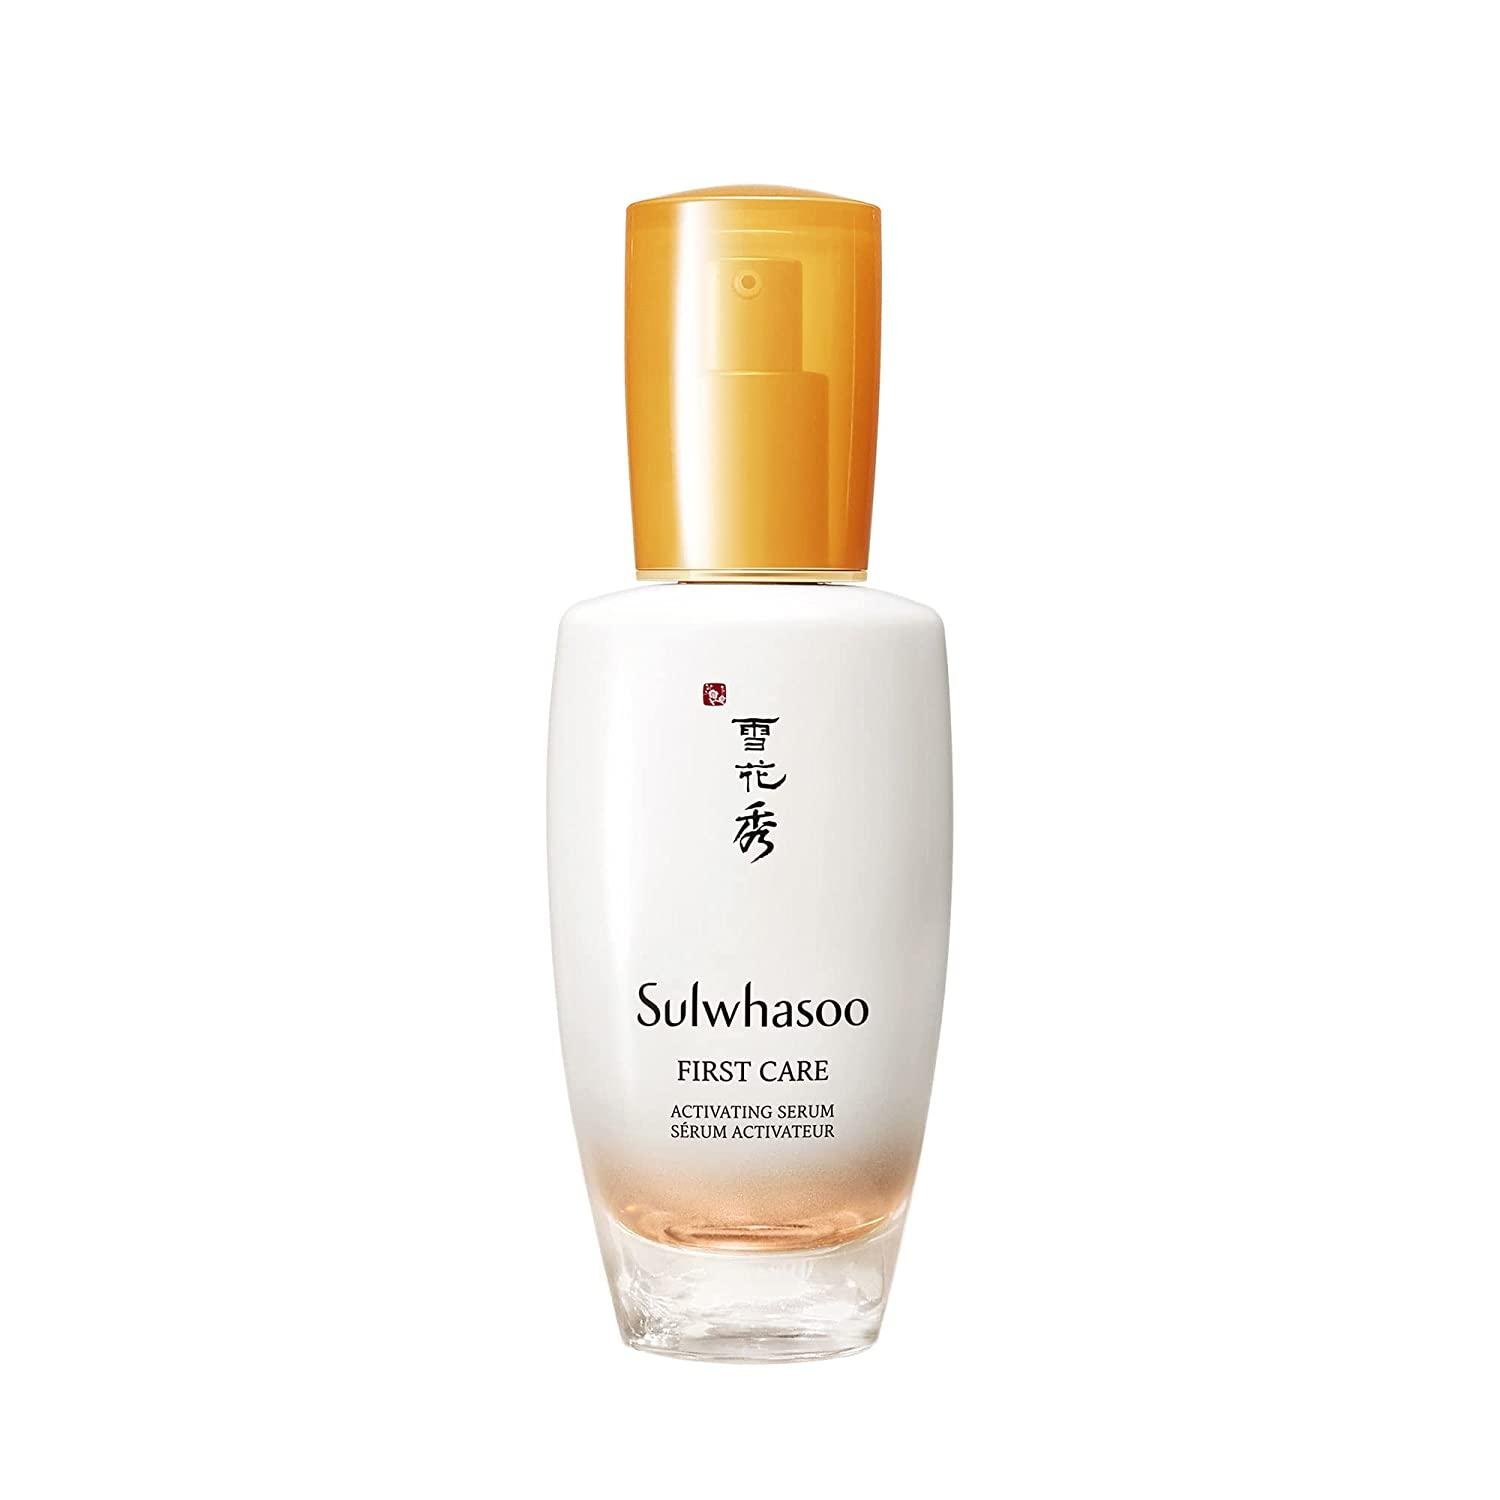 Sulwhasoo First Care Activating Serum: Nourishing, Hydrating, 30ml&90ml